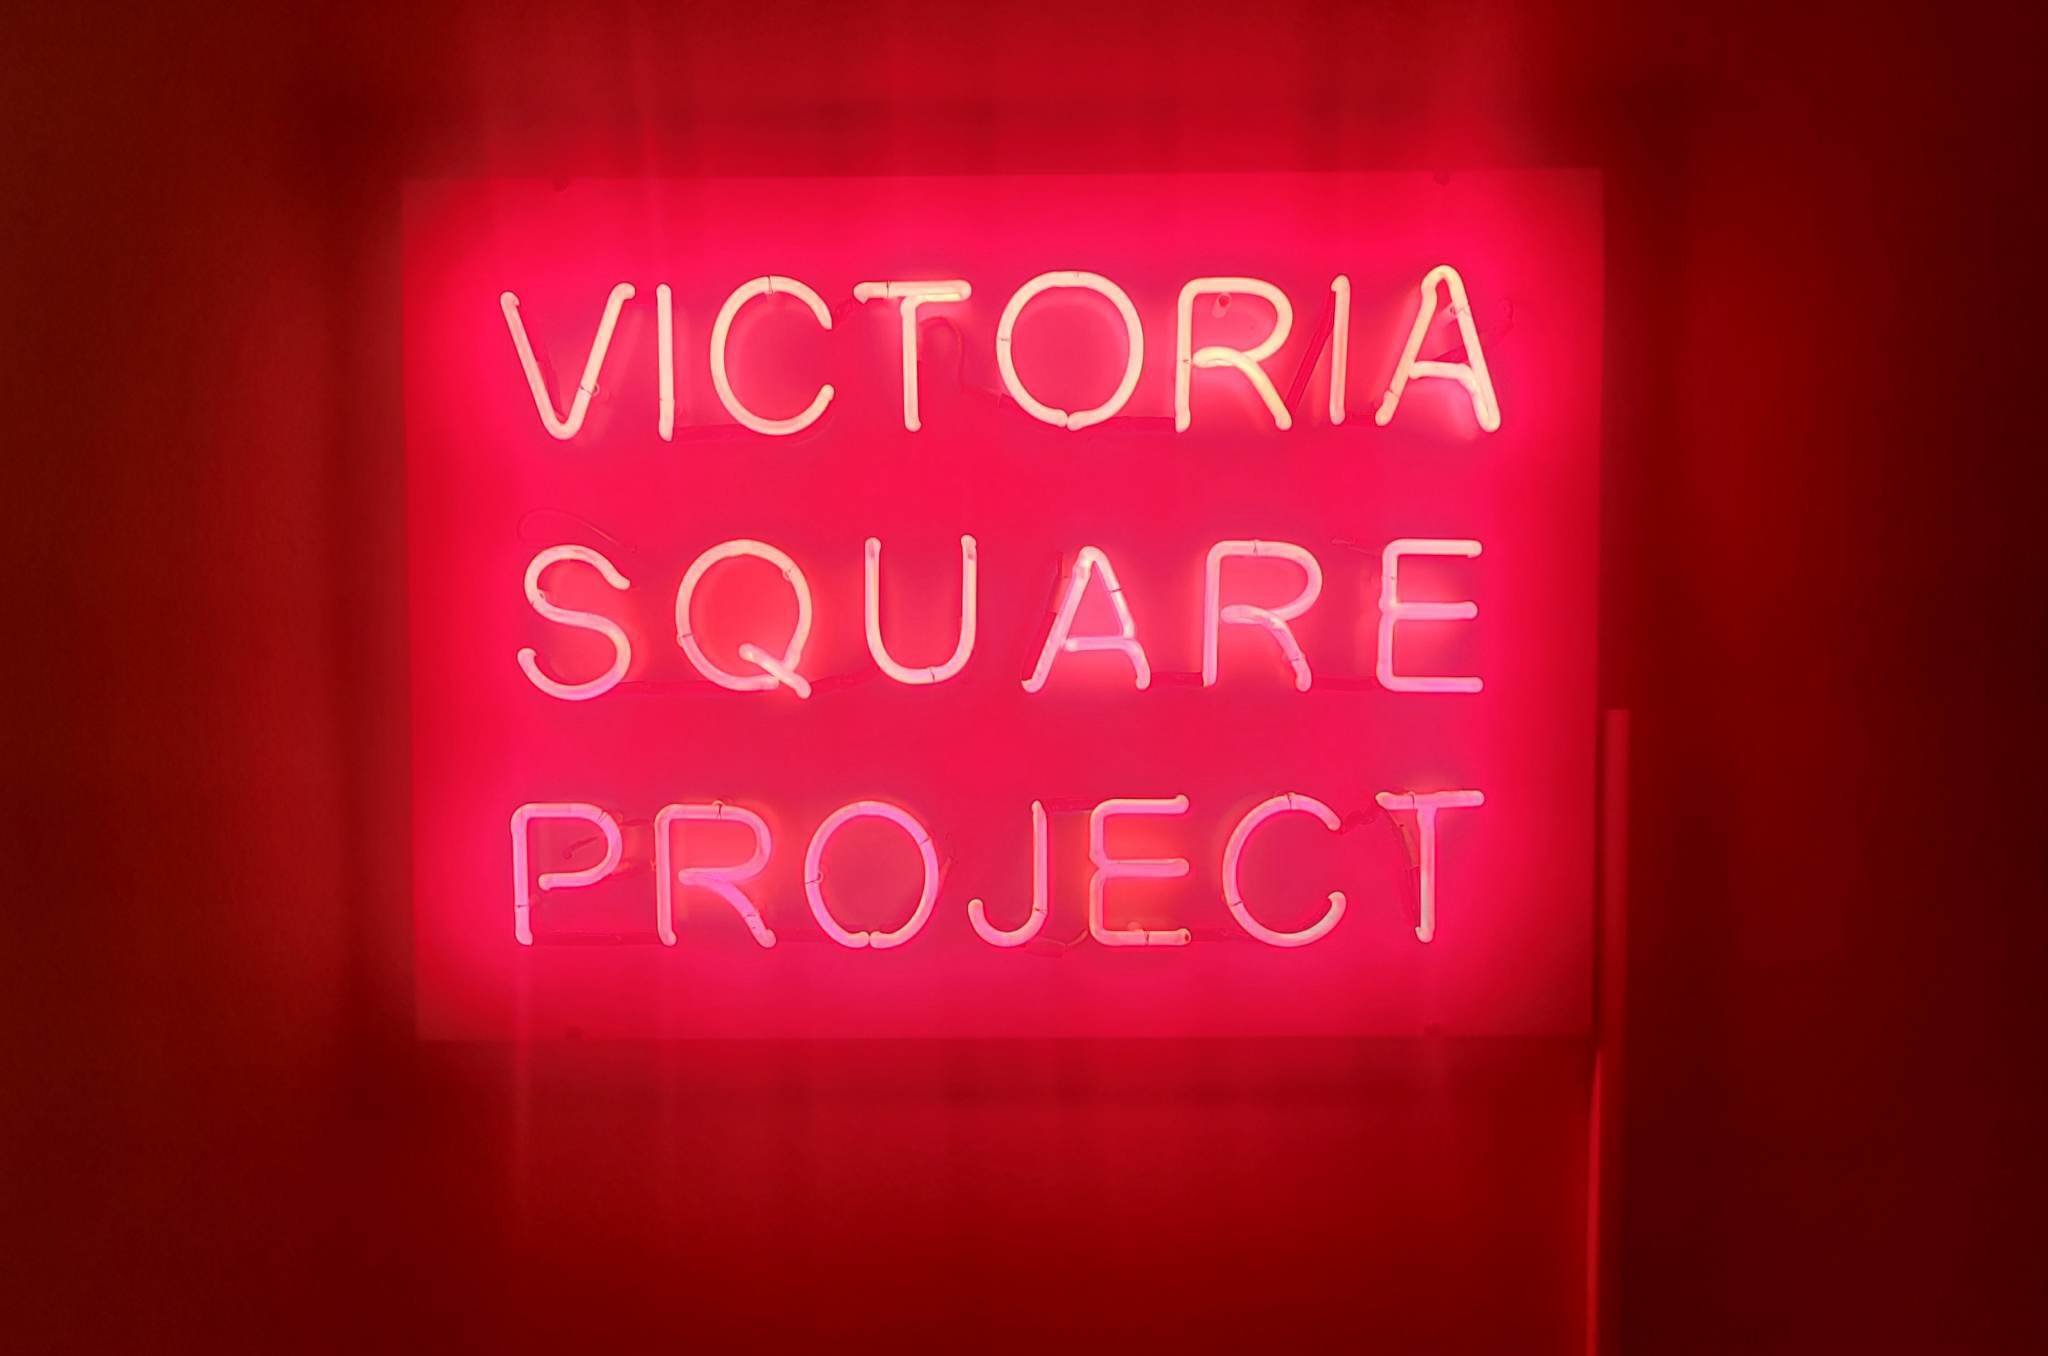 victoria-square-project.jpg?mtime=20230602112135#asset:418422